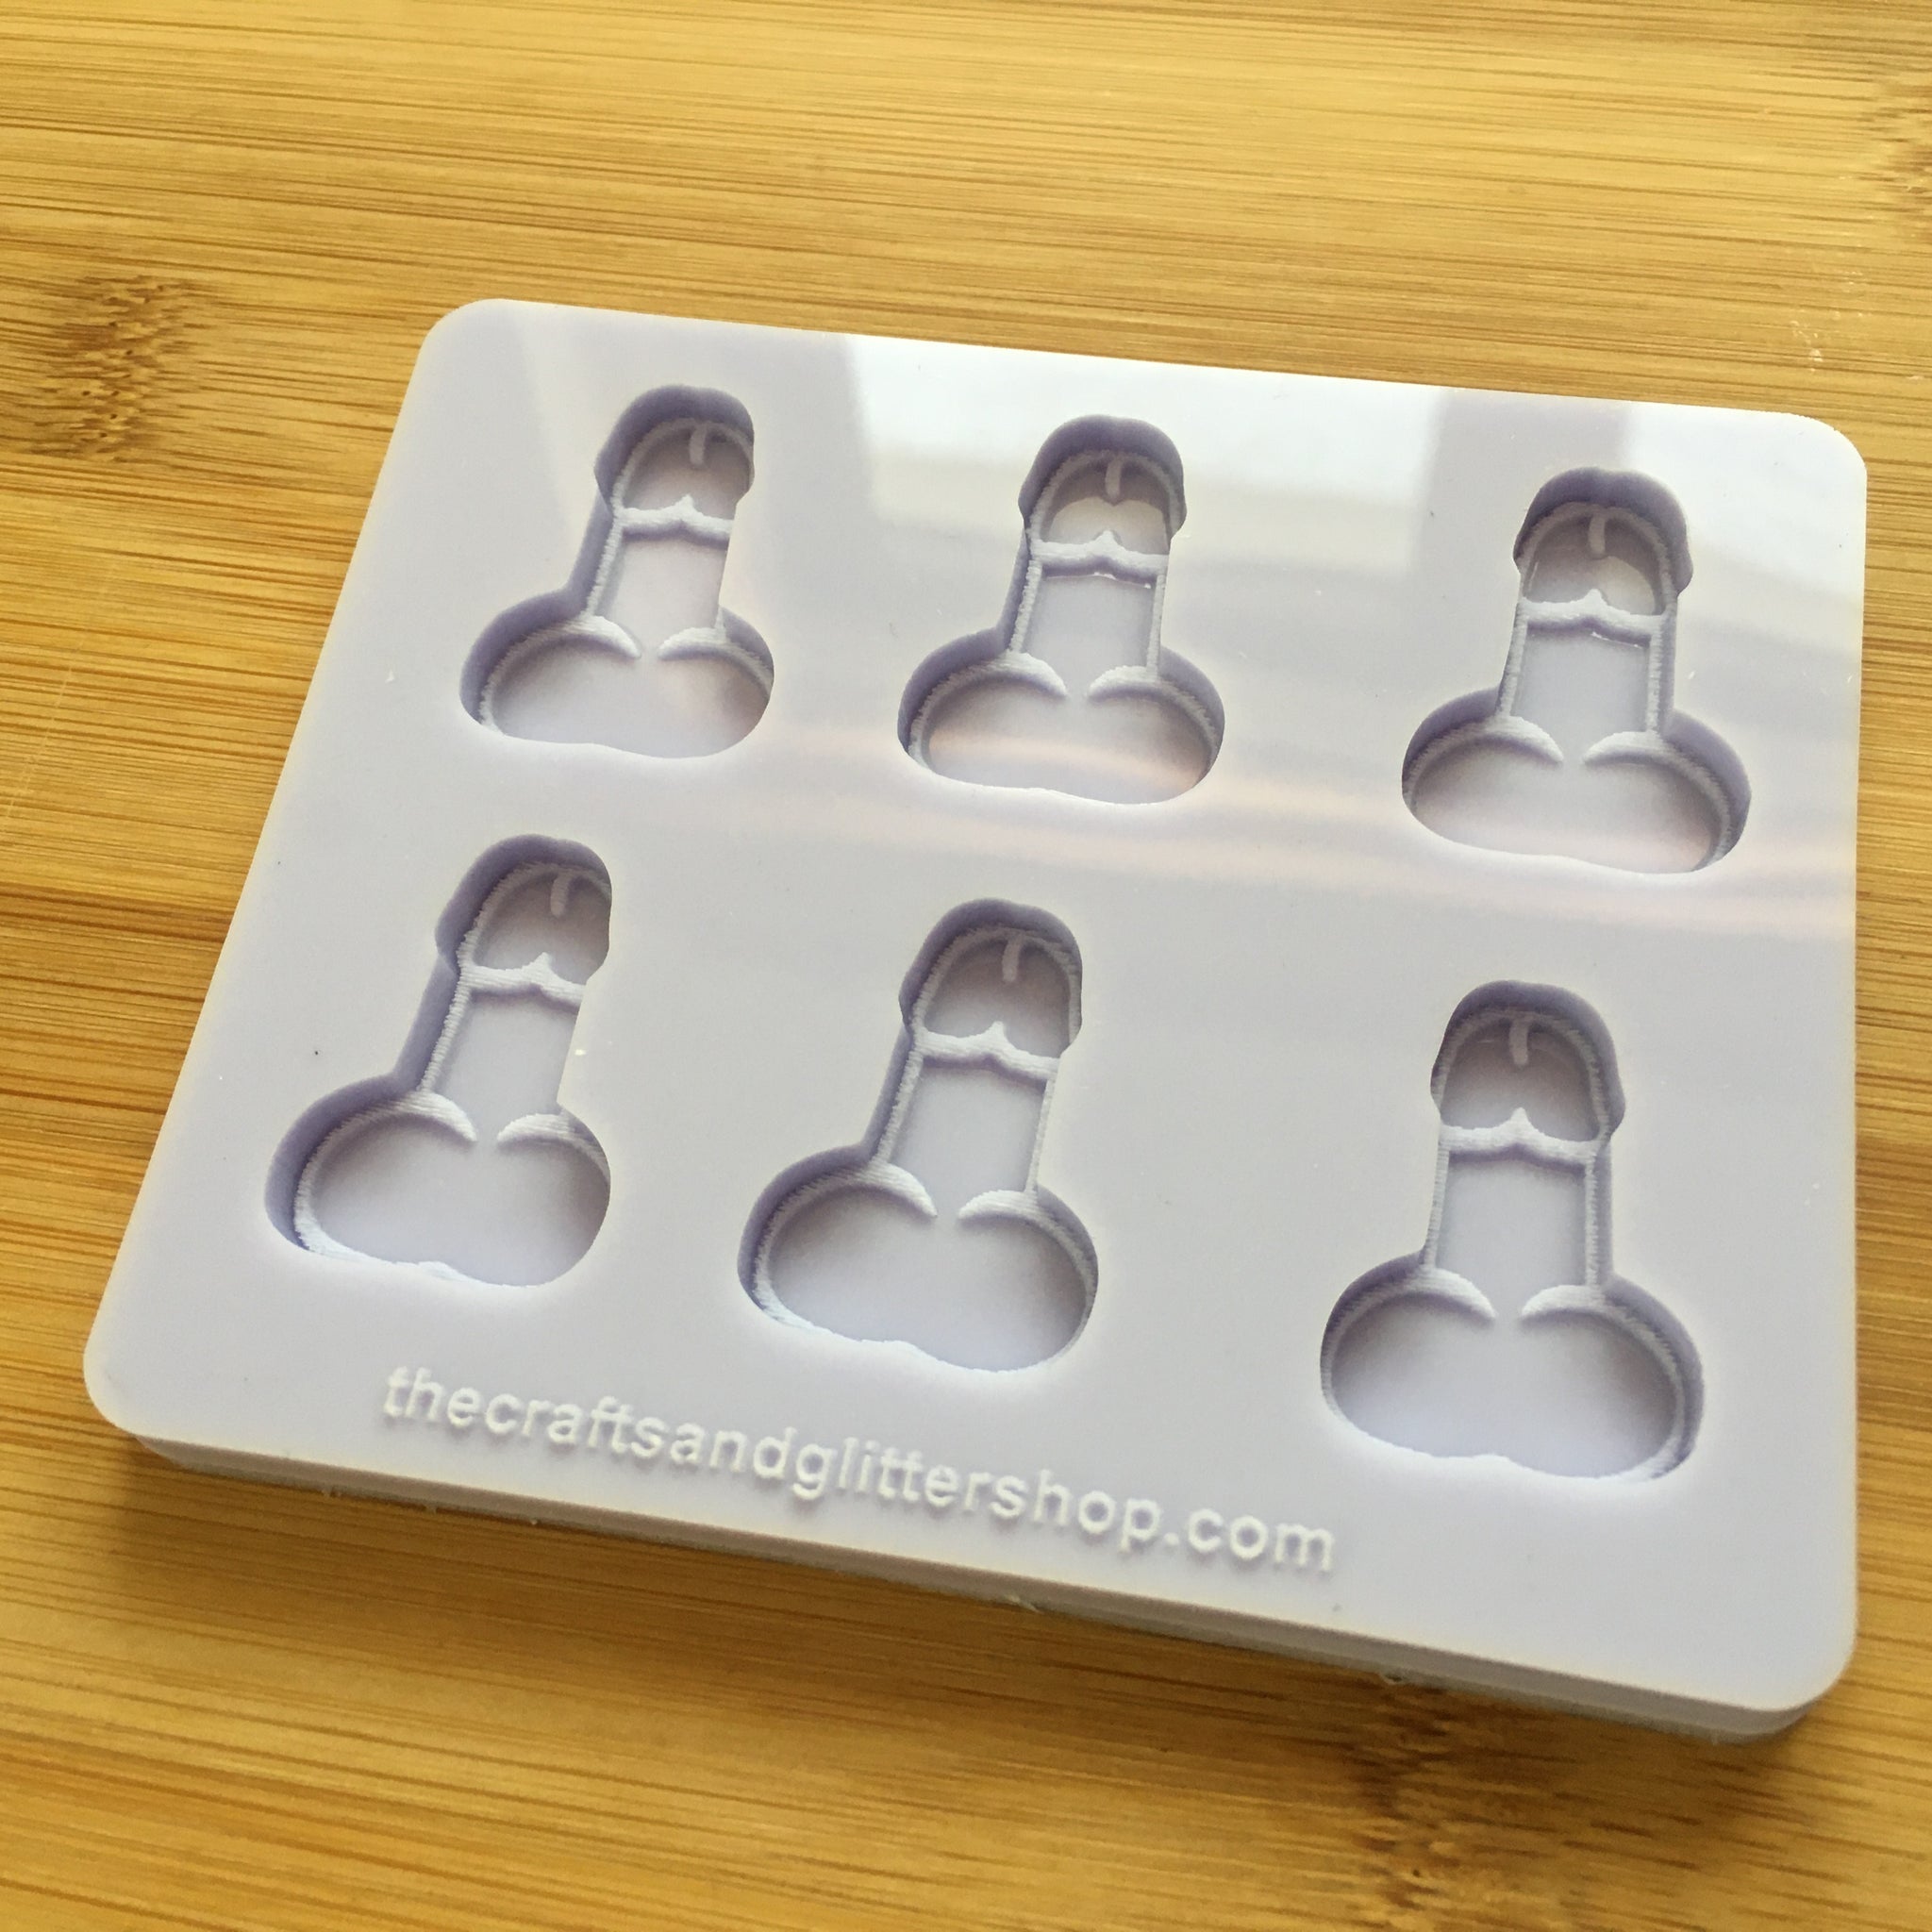 3cm Penis Silicone Mold, Food Safe Silicone Rubber Mould – The